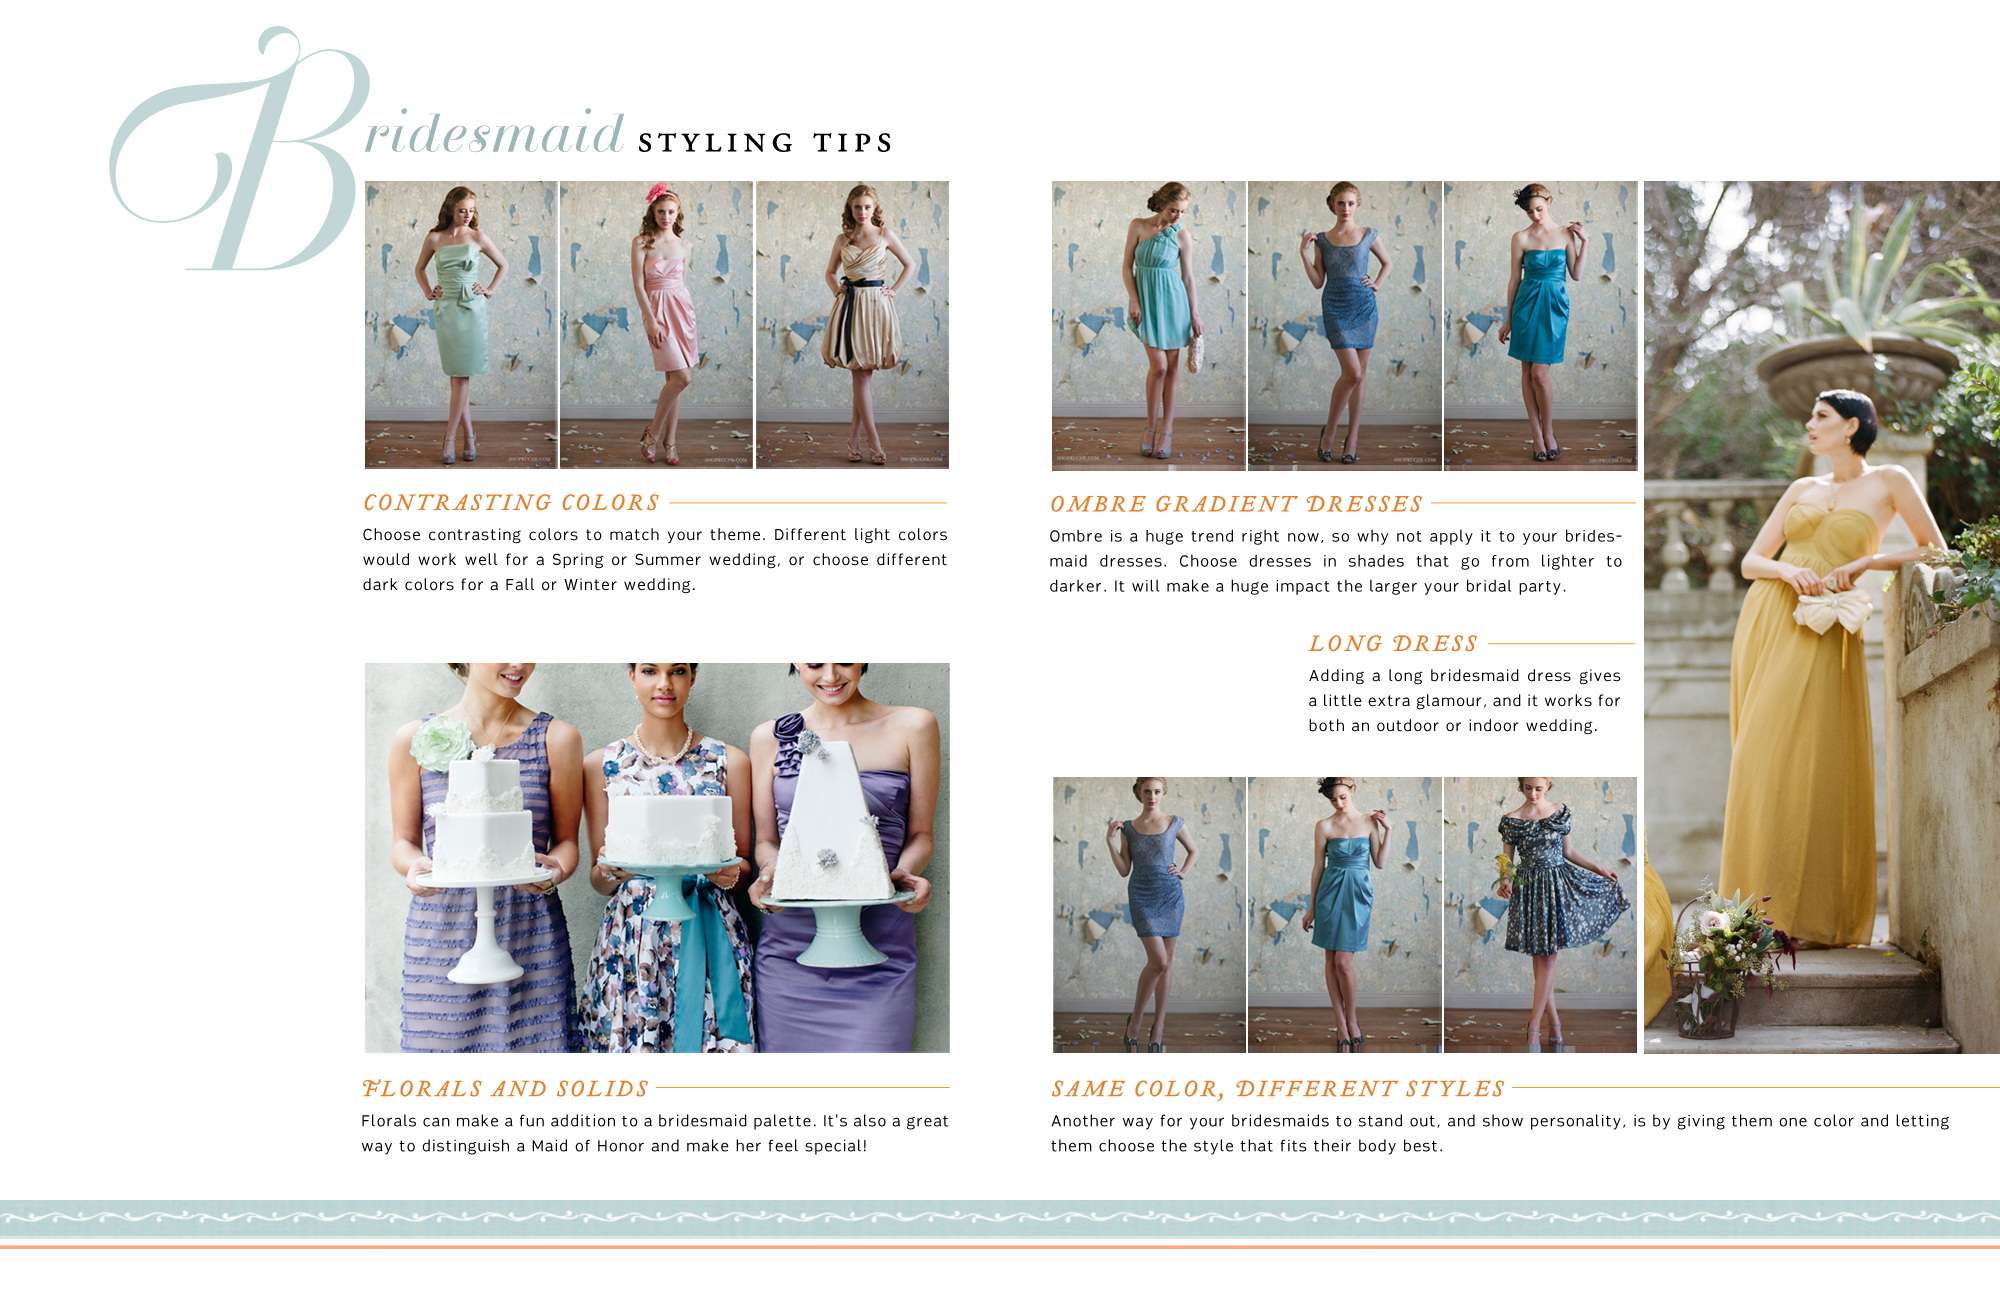 Wedding Bliss Guide Bridesmaid Styling Tips